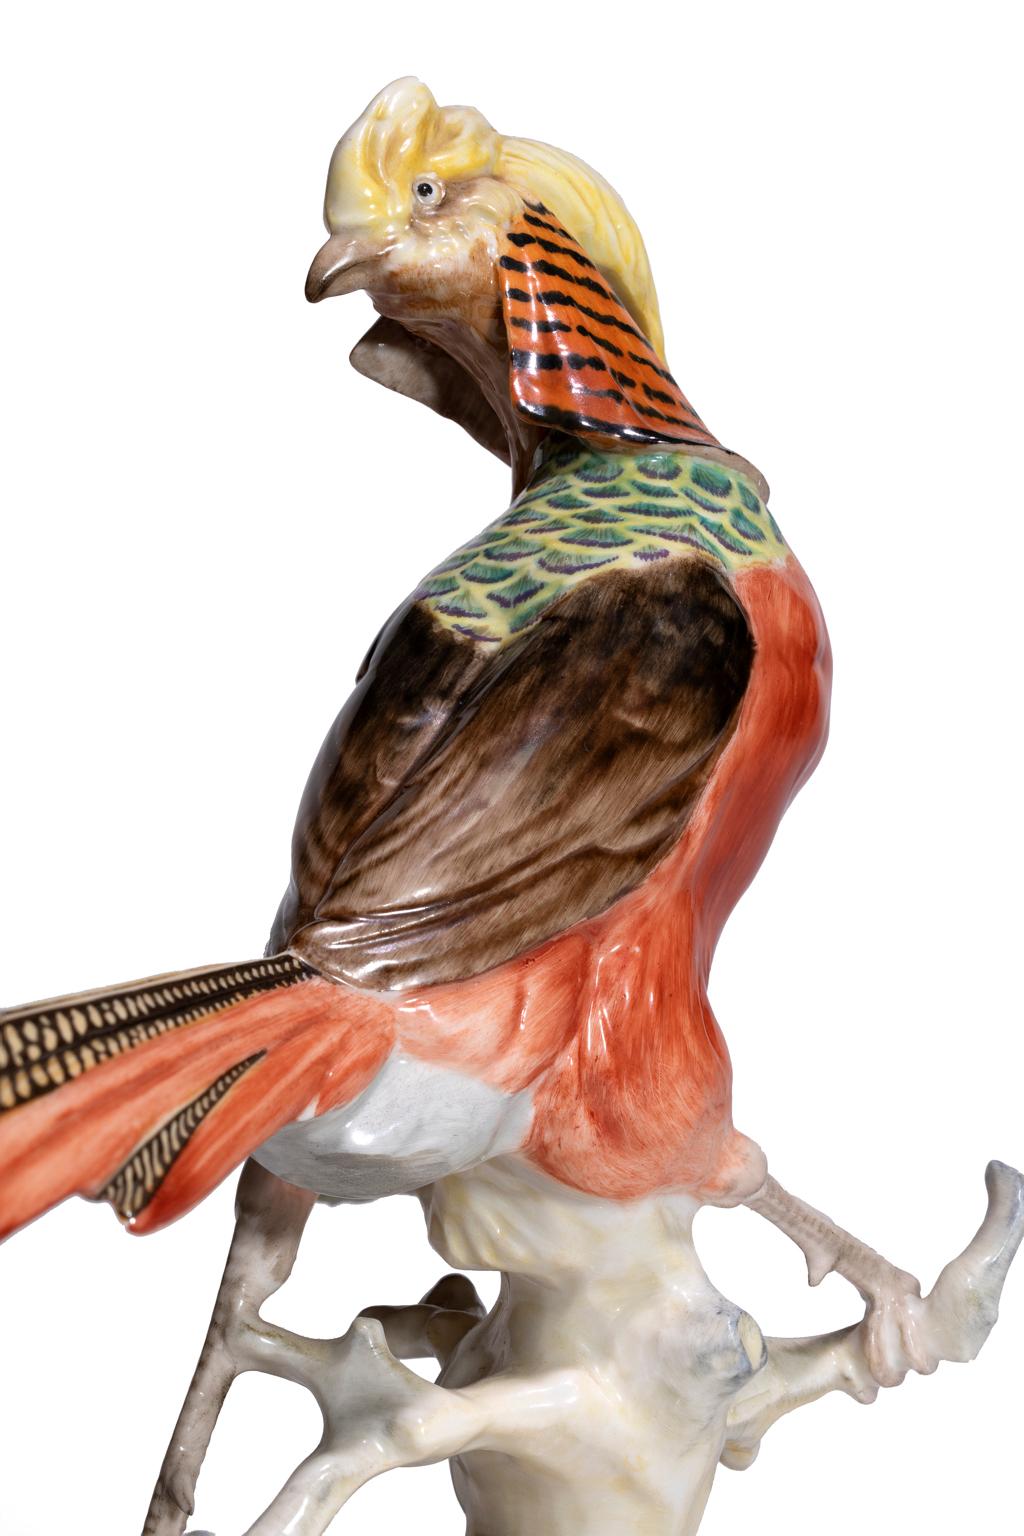 Hutschenreuther-Selb German Porcelain Figurine Karl Tutter Chinese Pheasant For Sale 3